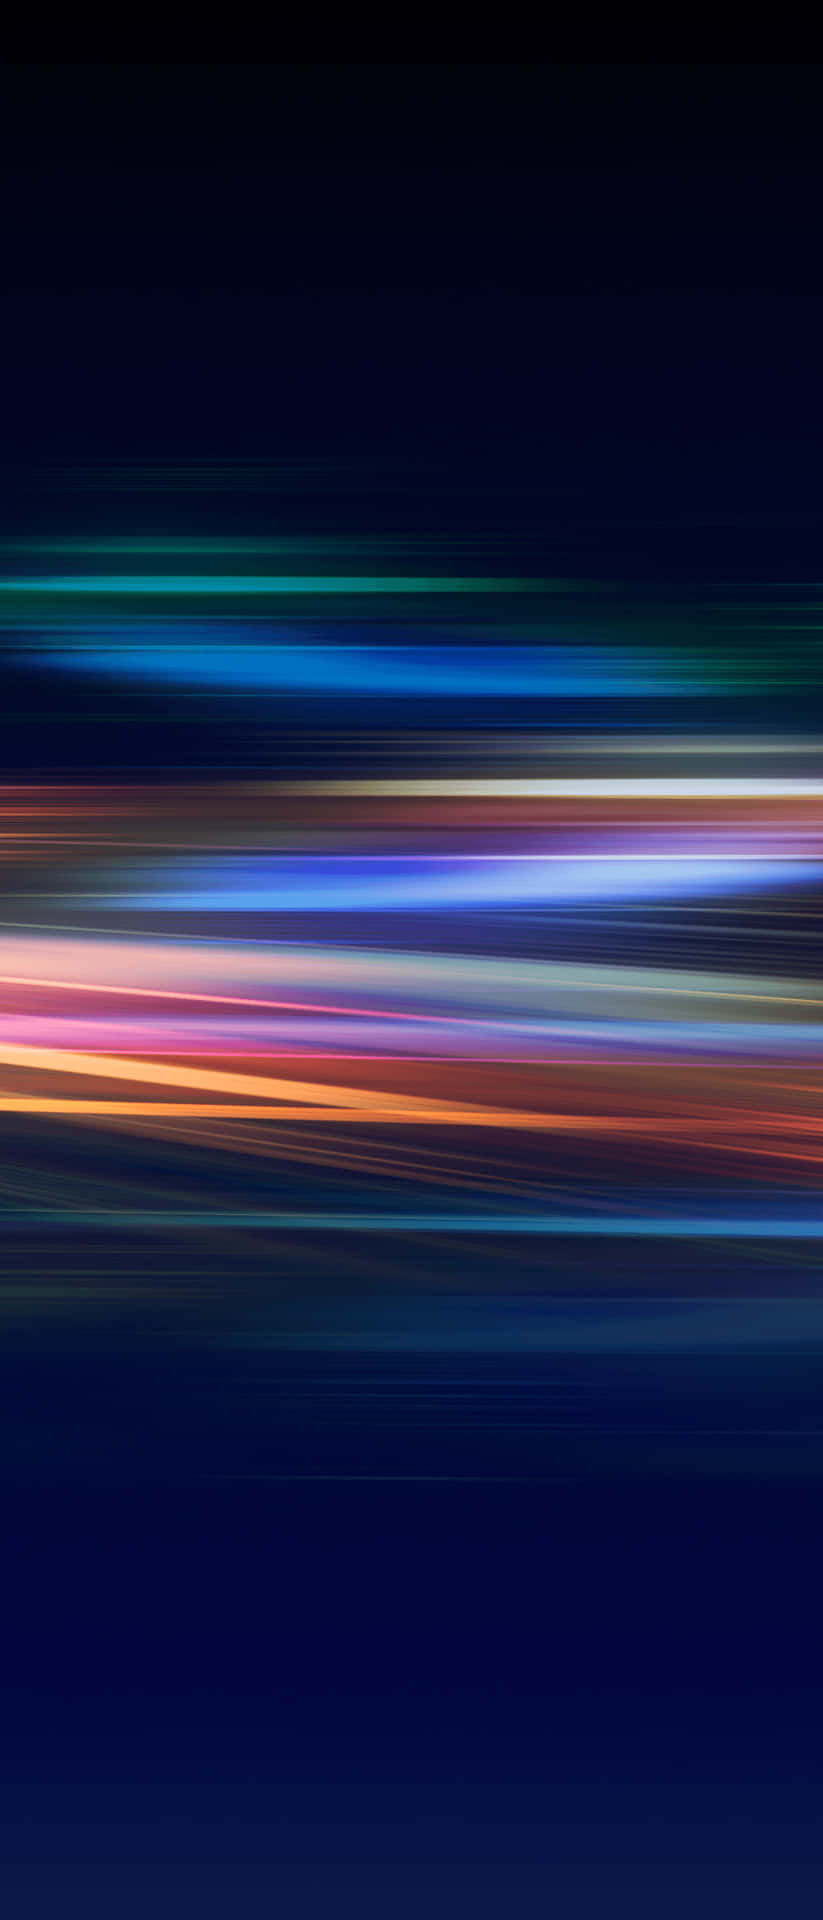 A Blurred Background With Colorful Lights Wallpaper